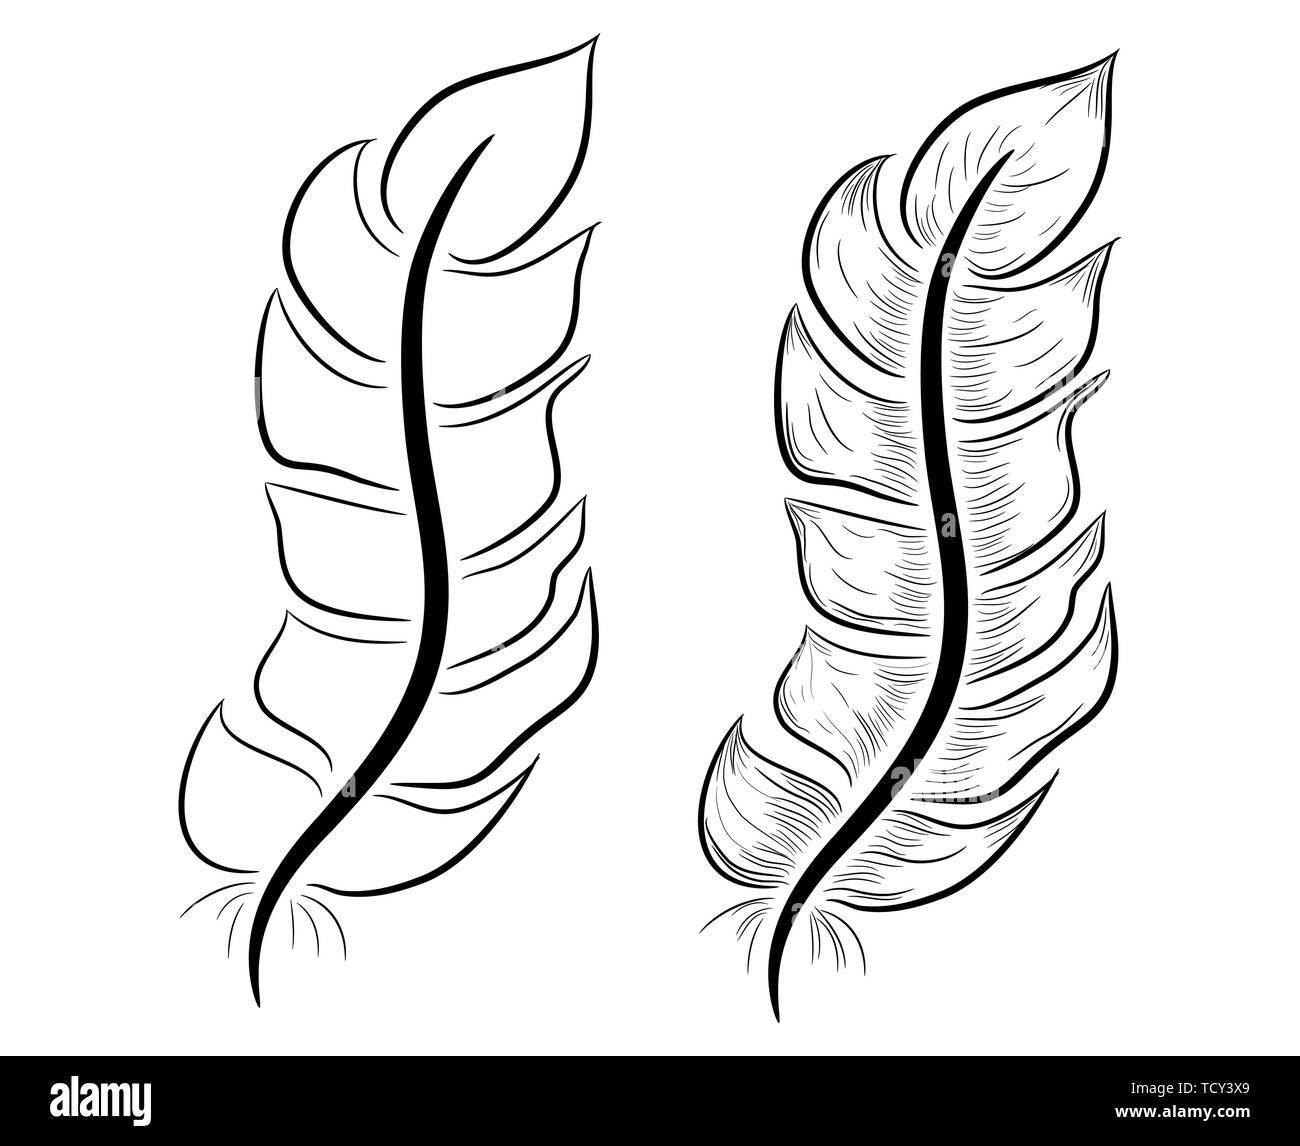 https://c8.alamy.com/comp/TCY3X9/feather-illustration-drawing-engraving-ink-line-art-TCY3X9.jpg